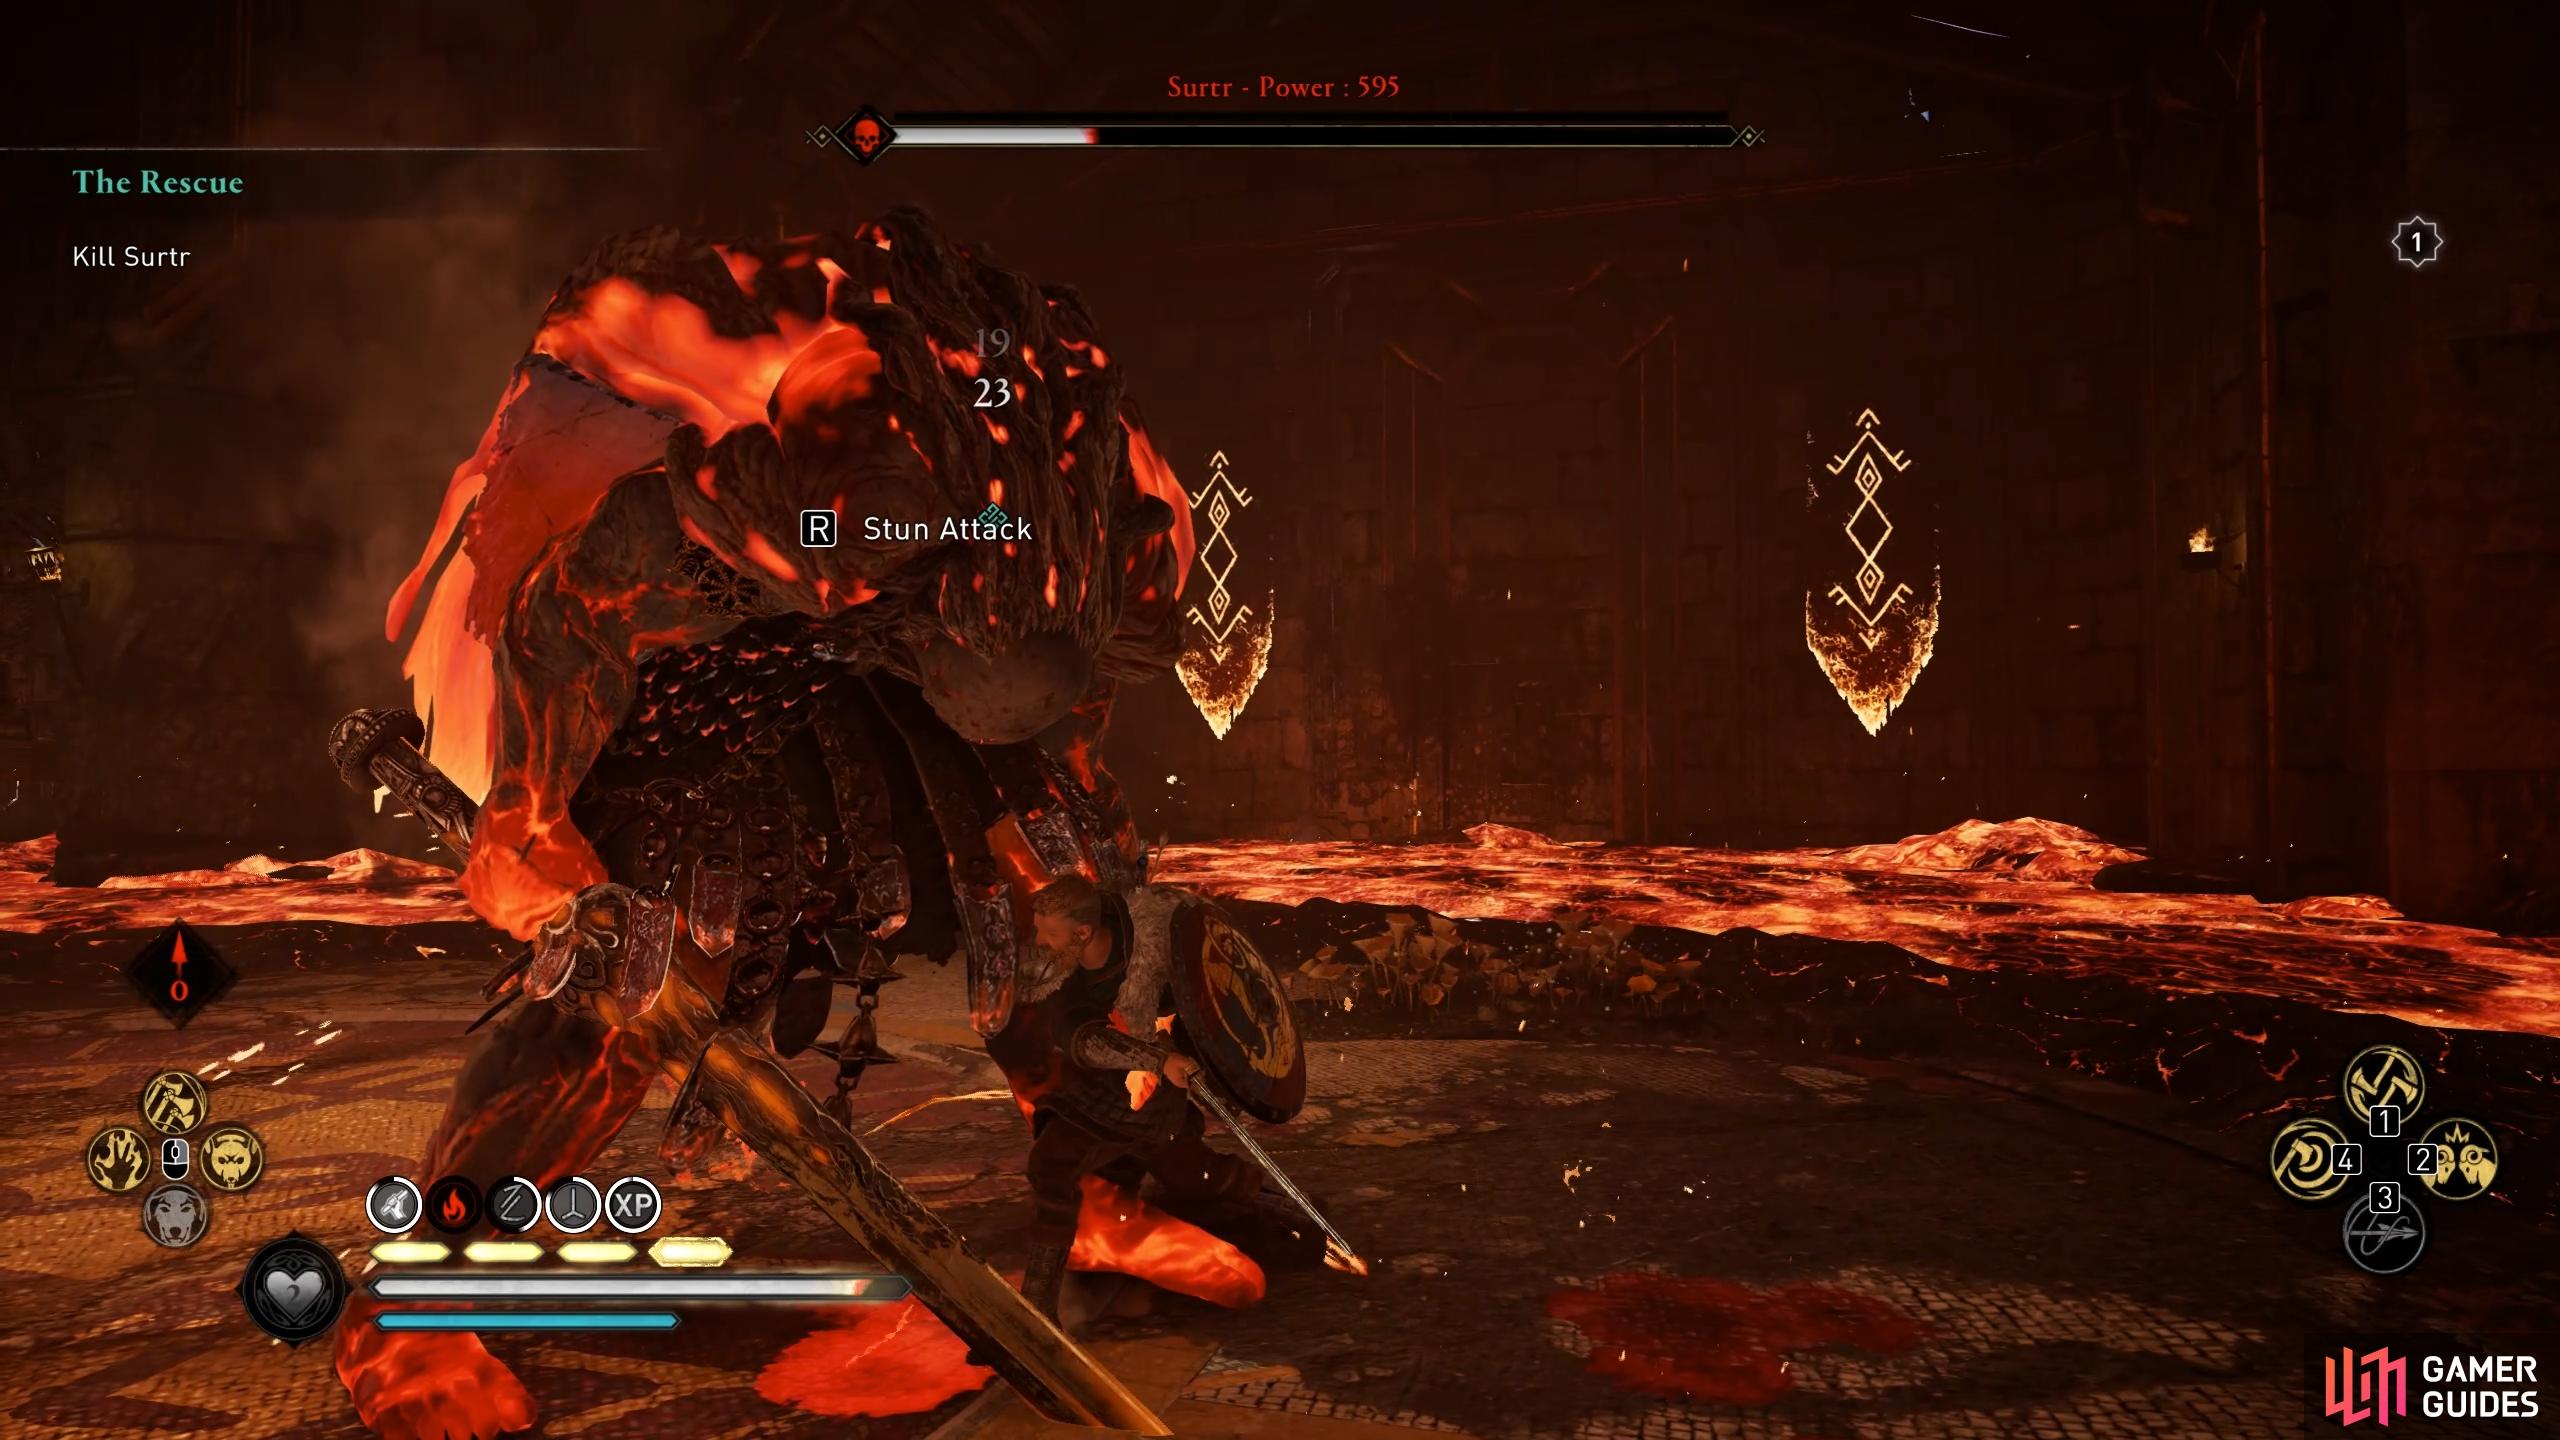 You can execute a stun attack once you've hit all of Surtr's weak points, or when his health is somewhere below 25%.